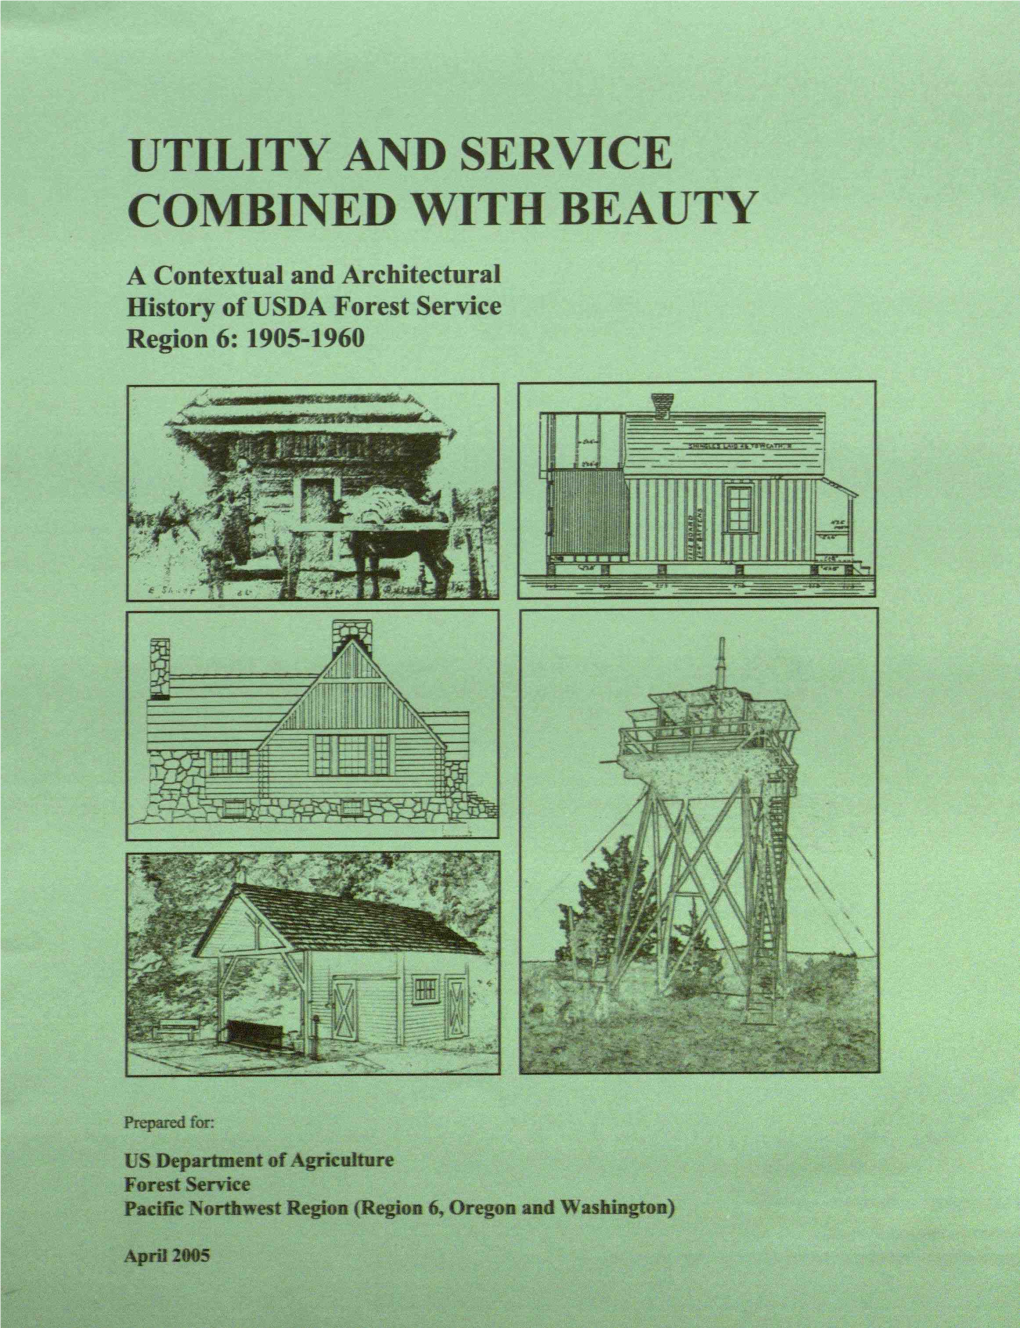 UTILITY and SERVICE COMBINED with BEAUTY a Contextual and Architectural History of USDA Forest Service Region 6: 1905-1960